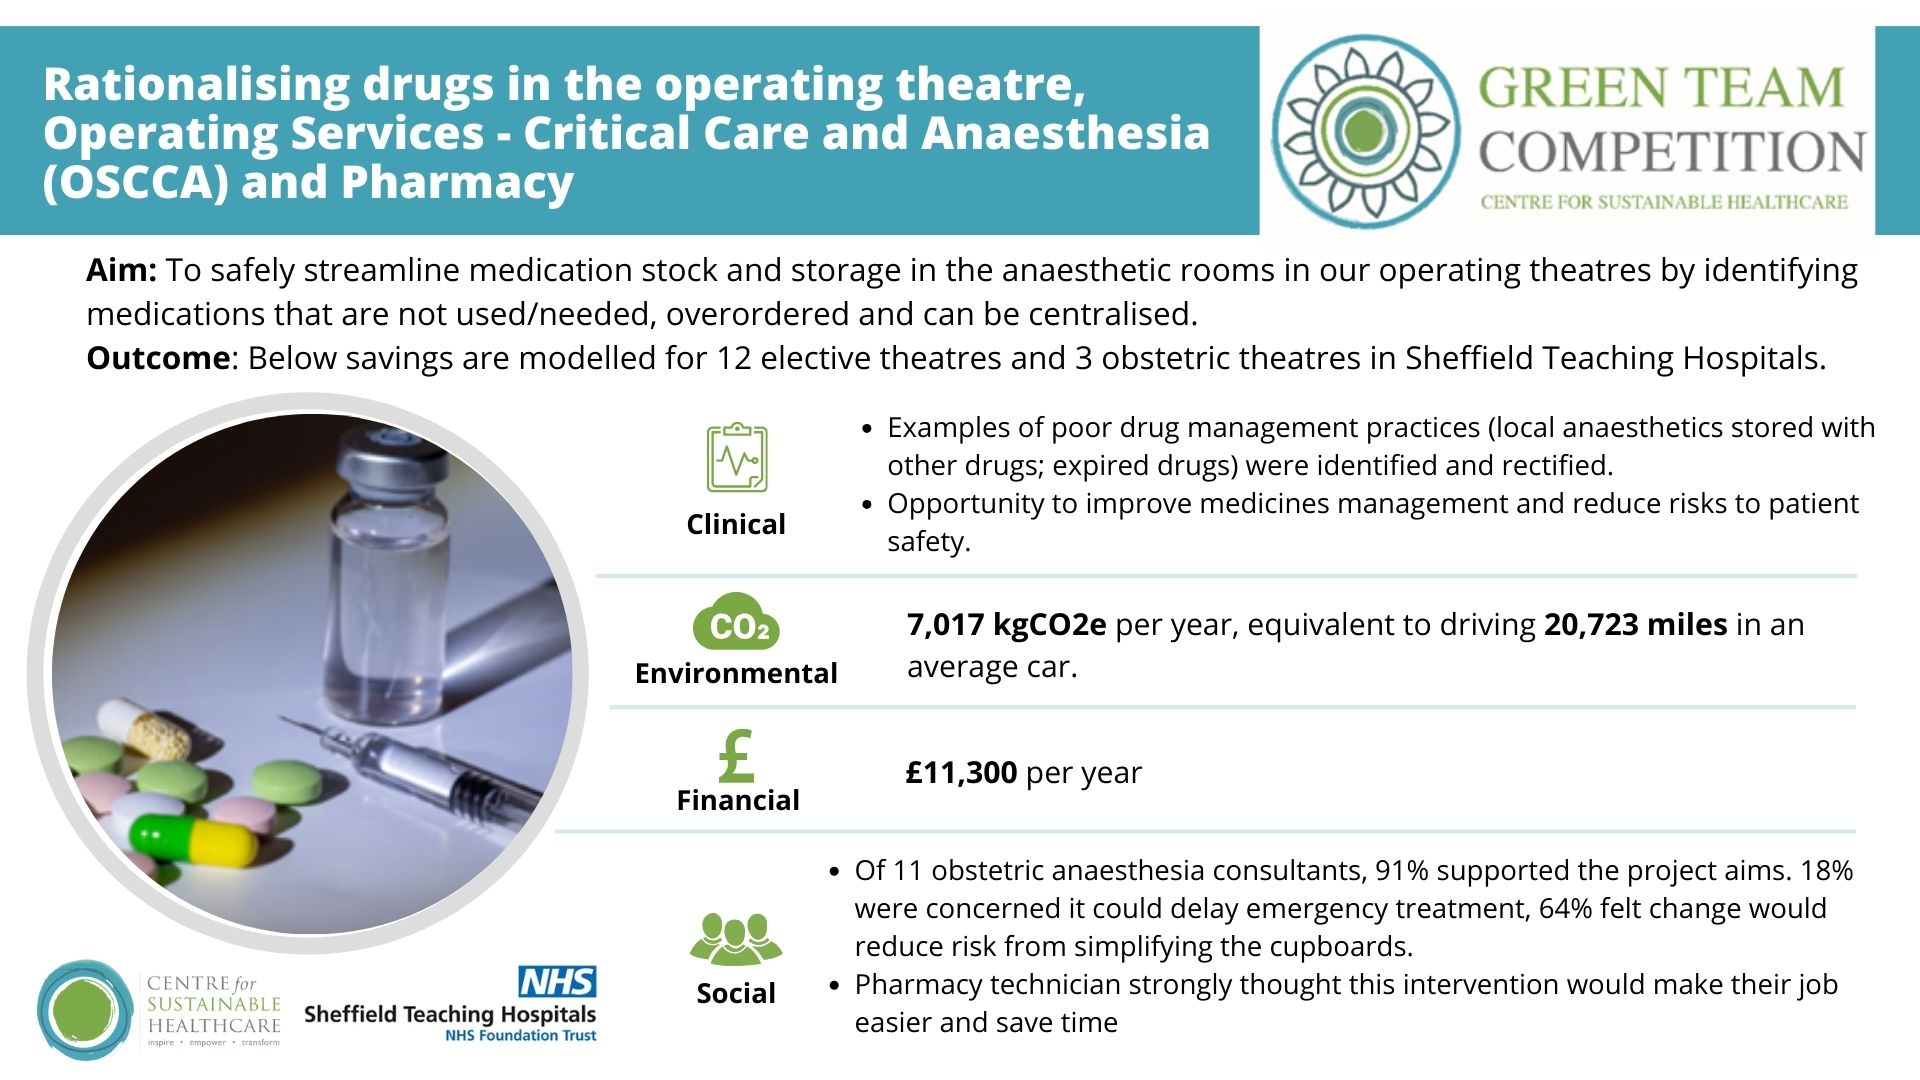 Sheffield Teaching Hospitals NHS Foundation Trust Green Team Competition 2023-24 Project 4: Rationalising drugs in the operating theatre, Operating Services, Critical Care and Anaesthesia (oscca) and Pharmacy